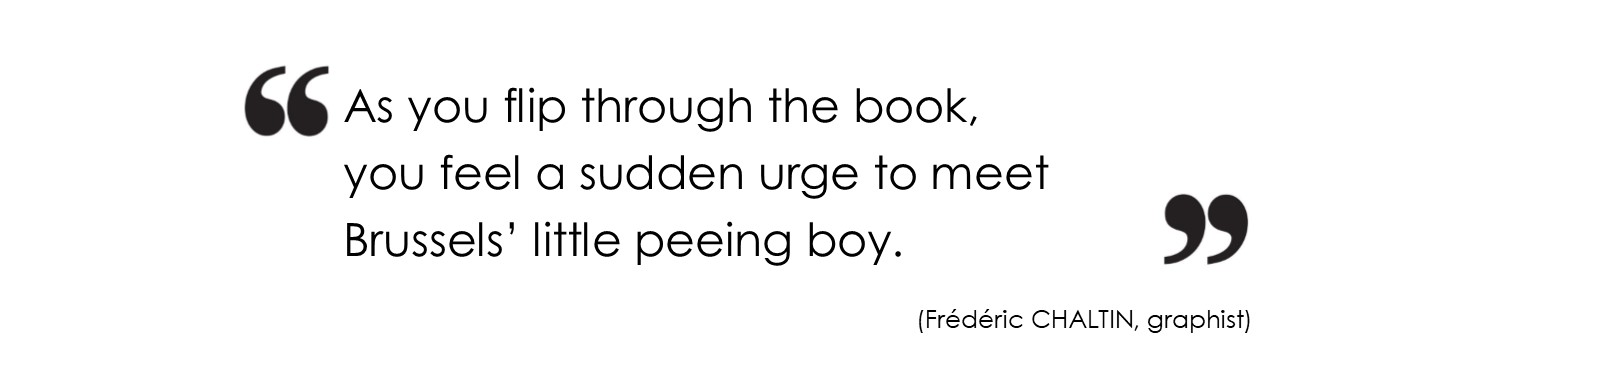 As you flip through the book, you feel a sudden urge to meet Brussels’ little peeing boy. (Frédéric CHALTIN, graphist)